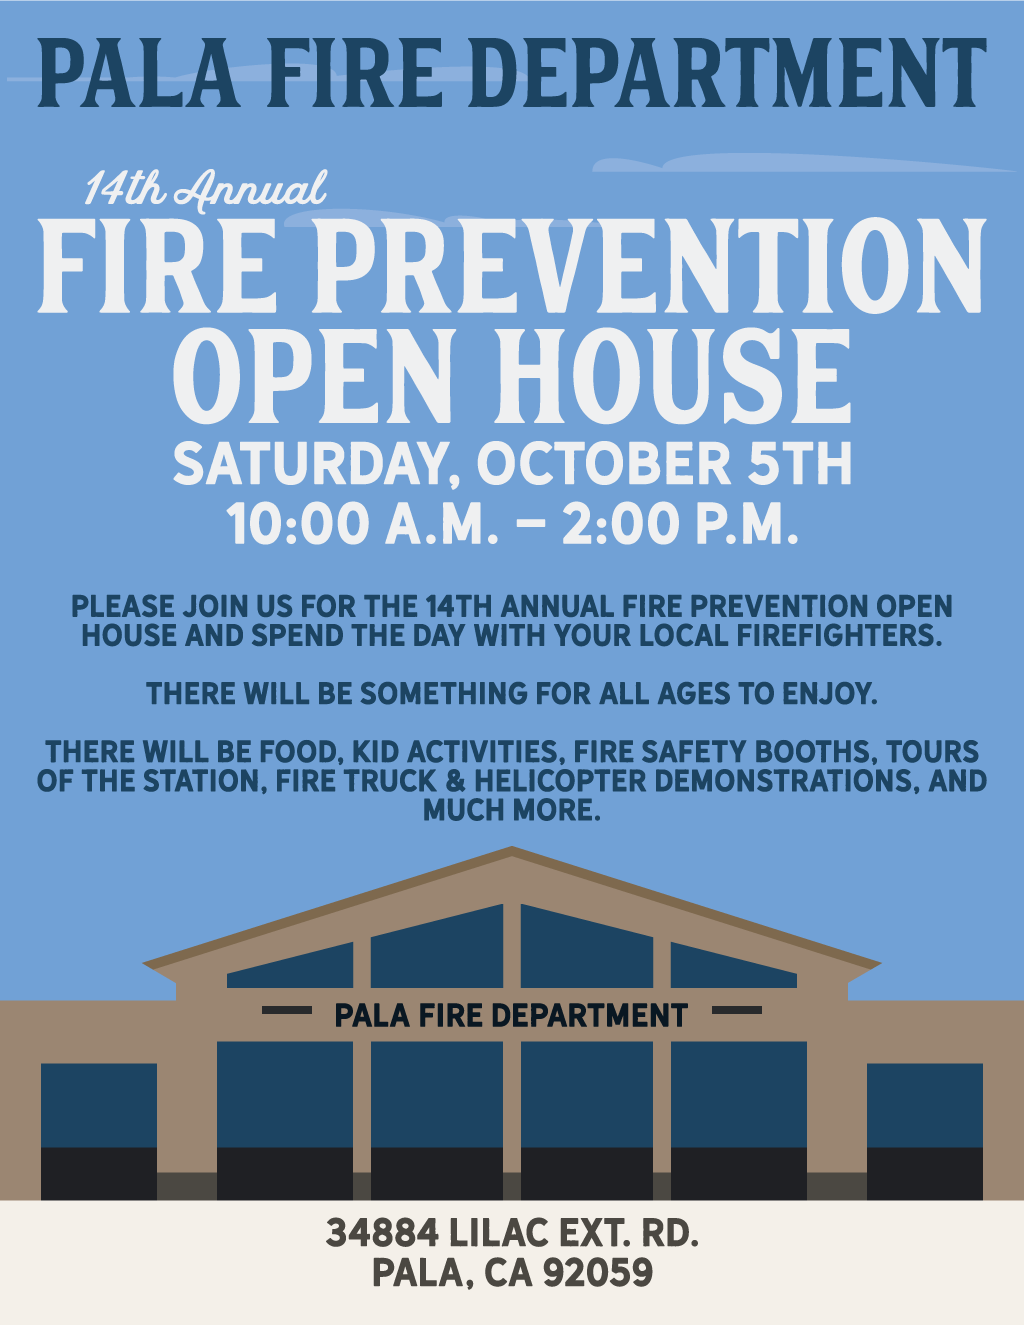 Pala Band of Mission Indians Pala Fire Department Fire Prevention Open House